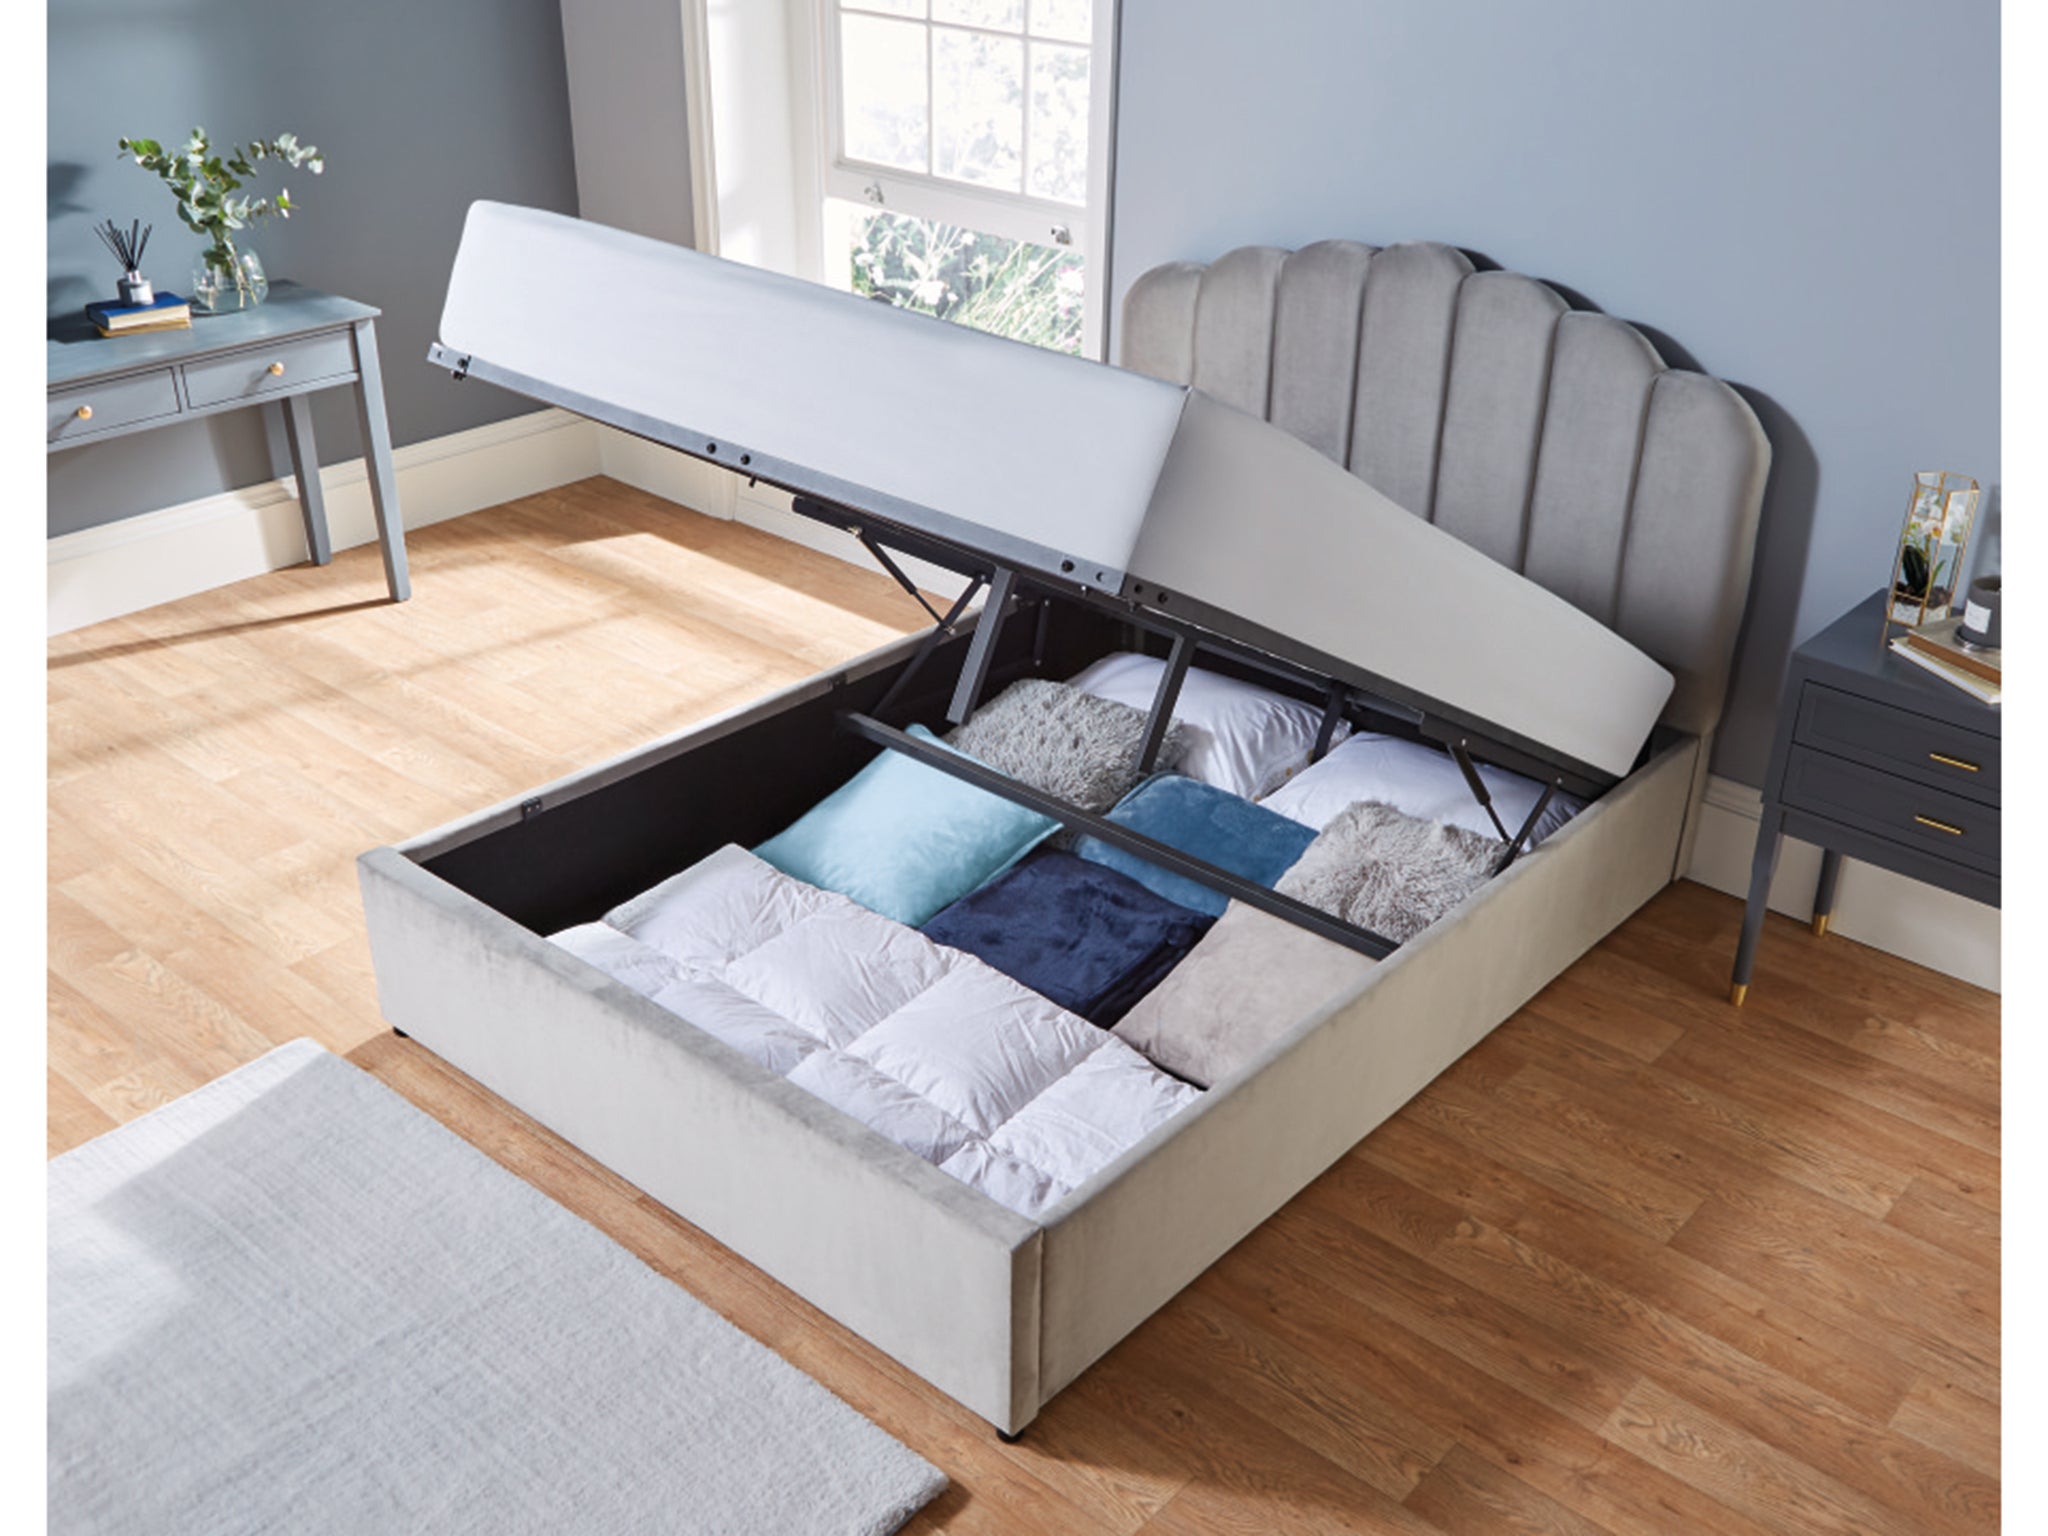 scallop-ottoman-bed-indybest